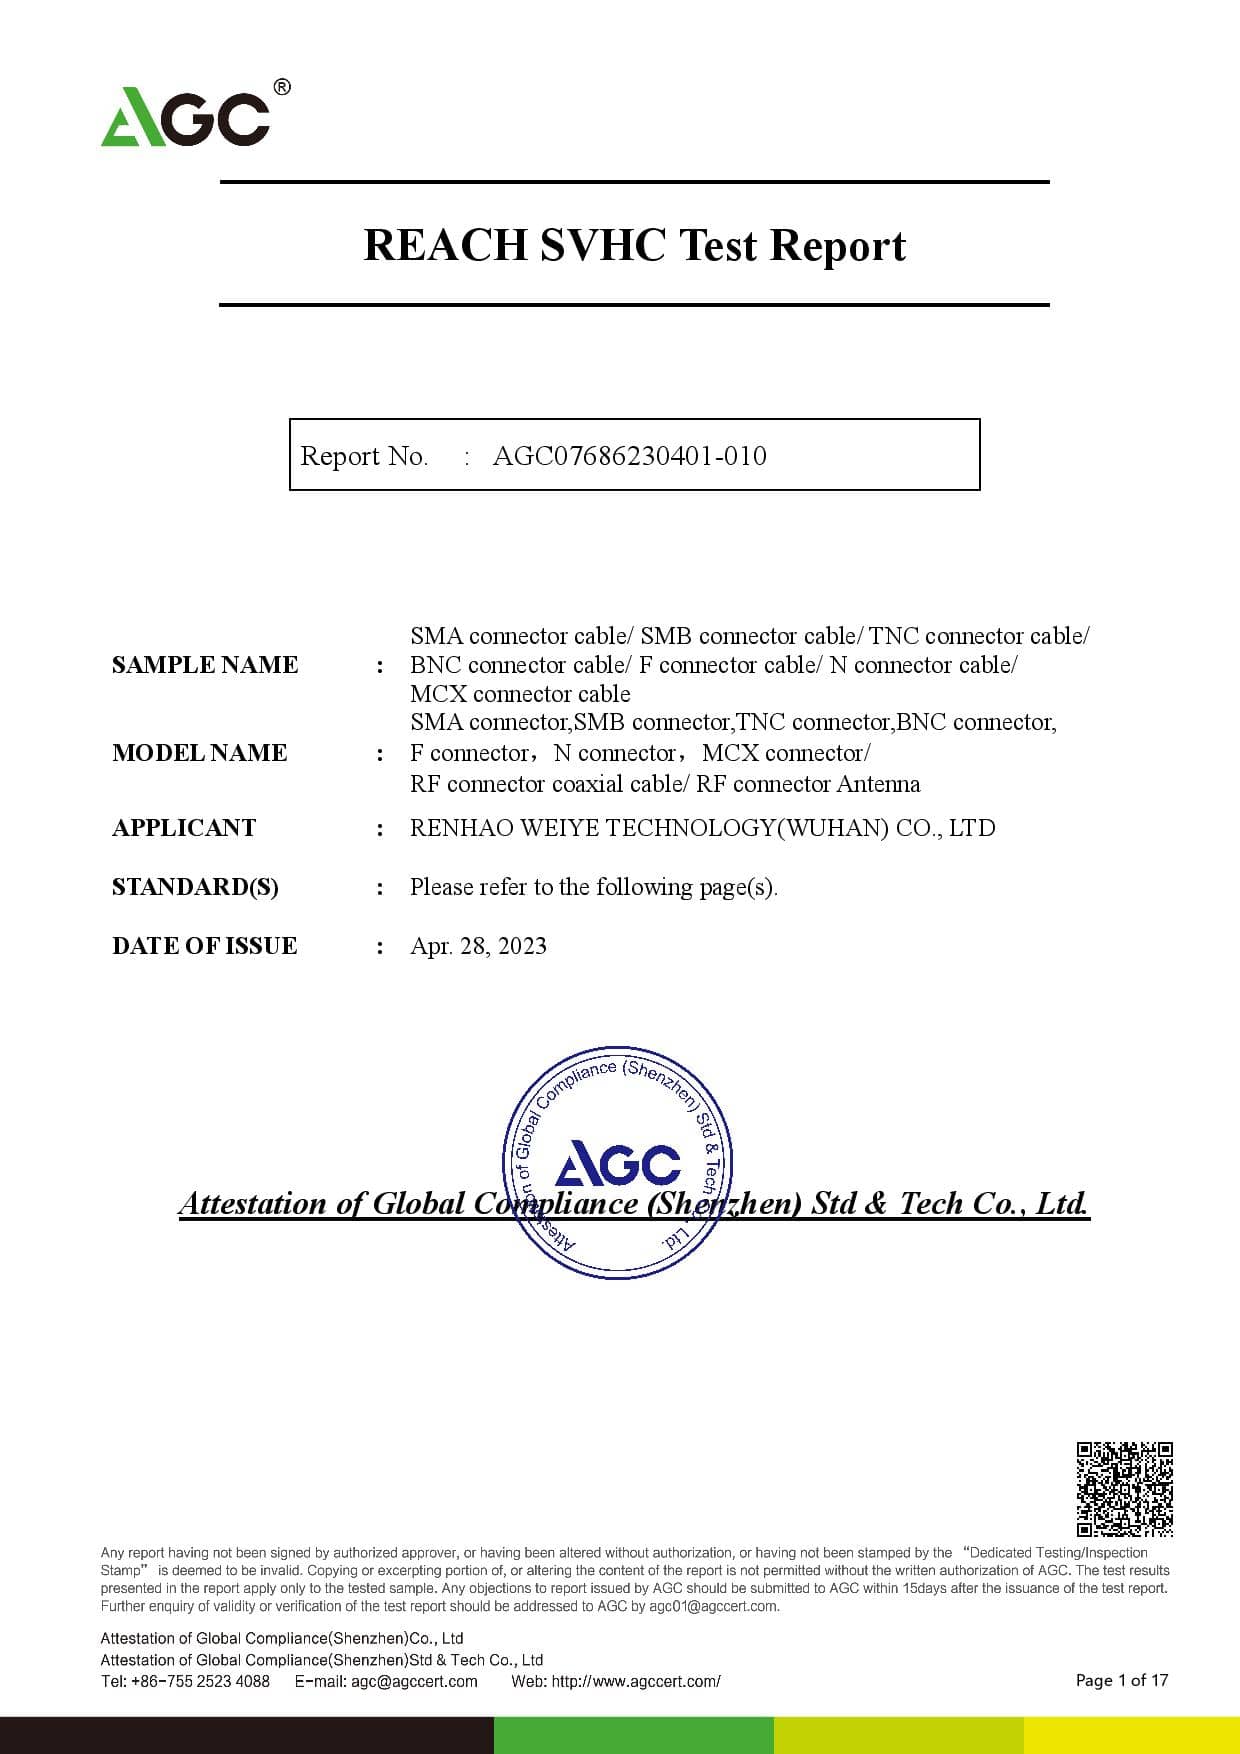 REACH Test Report AGC07686230401-010 RF Cable Connector